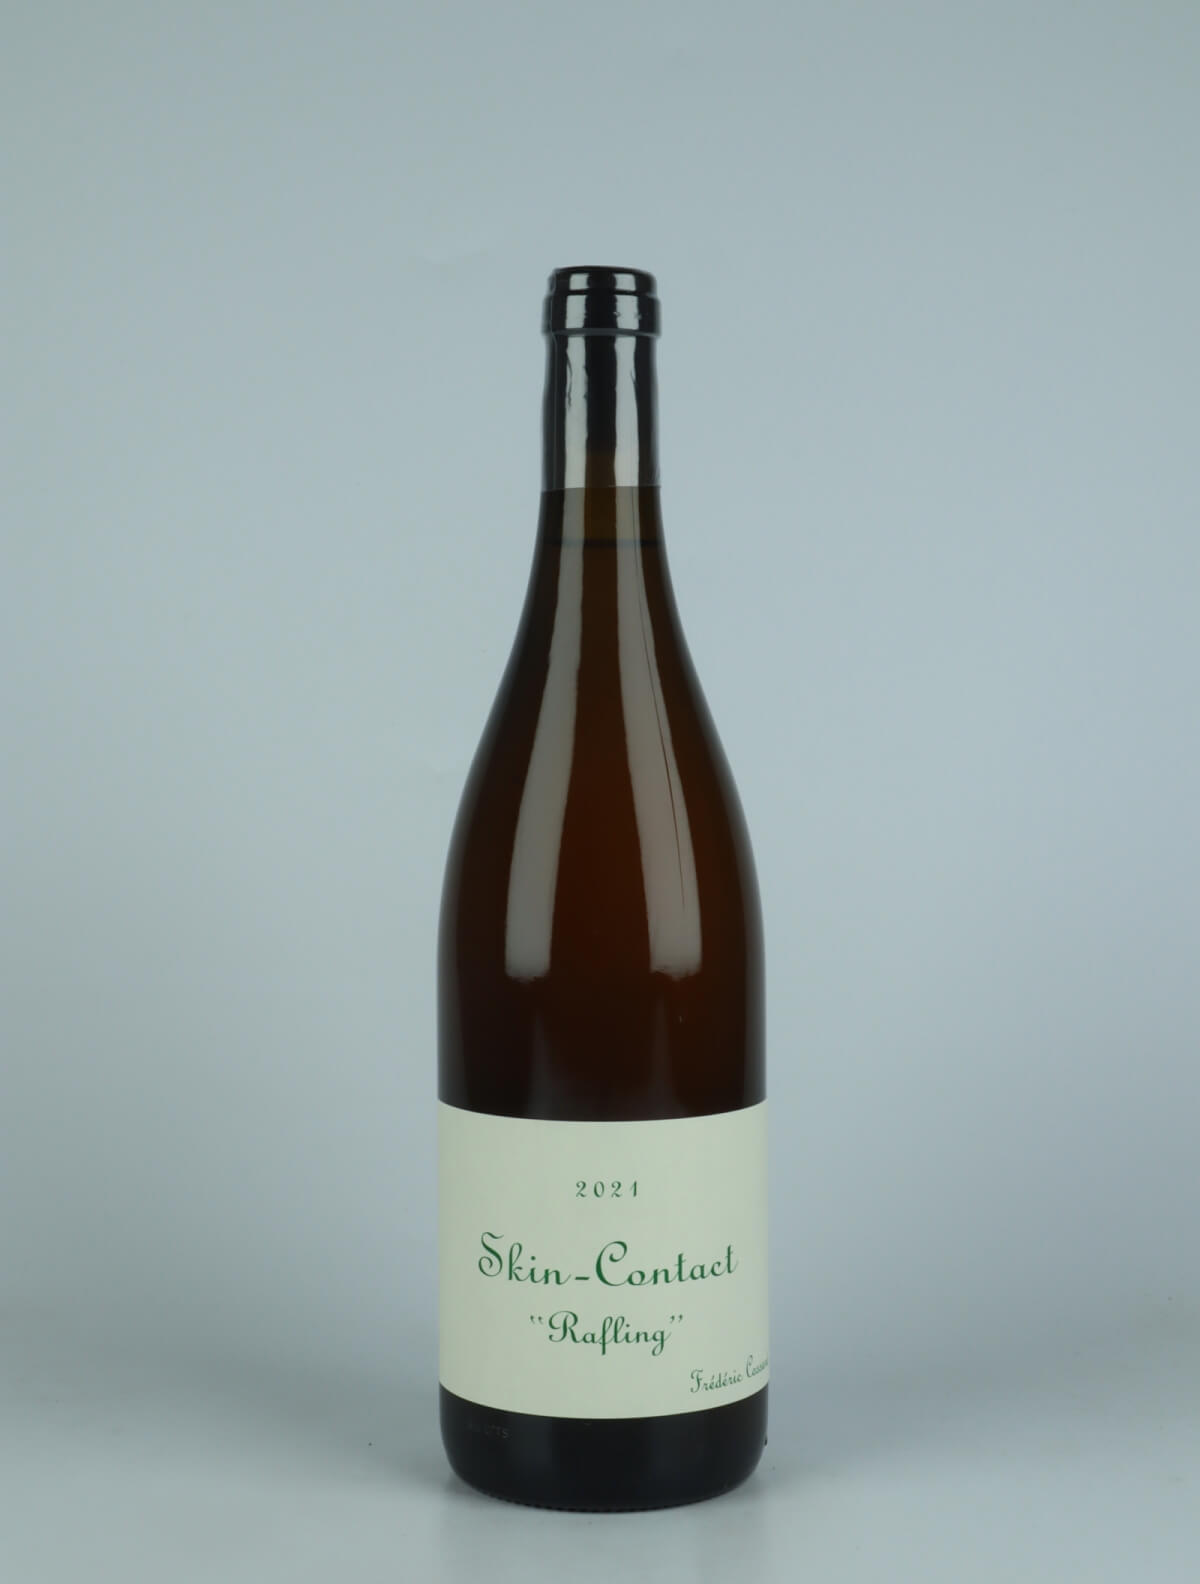 A bottle 2021 Skin-Contact - Rafling Orange wine from Frédéric Cossard, Burgundy in France